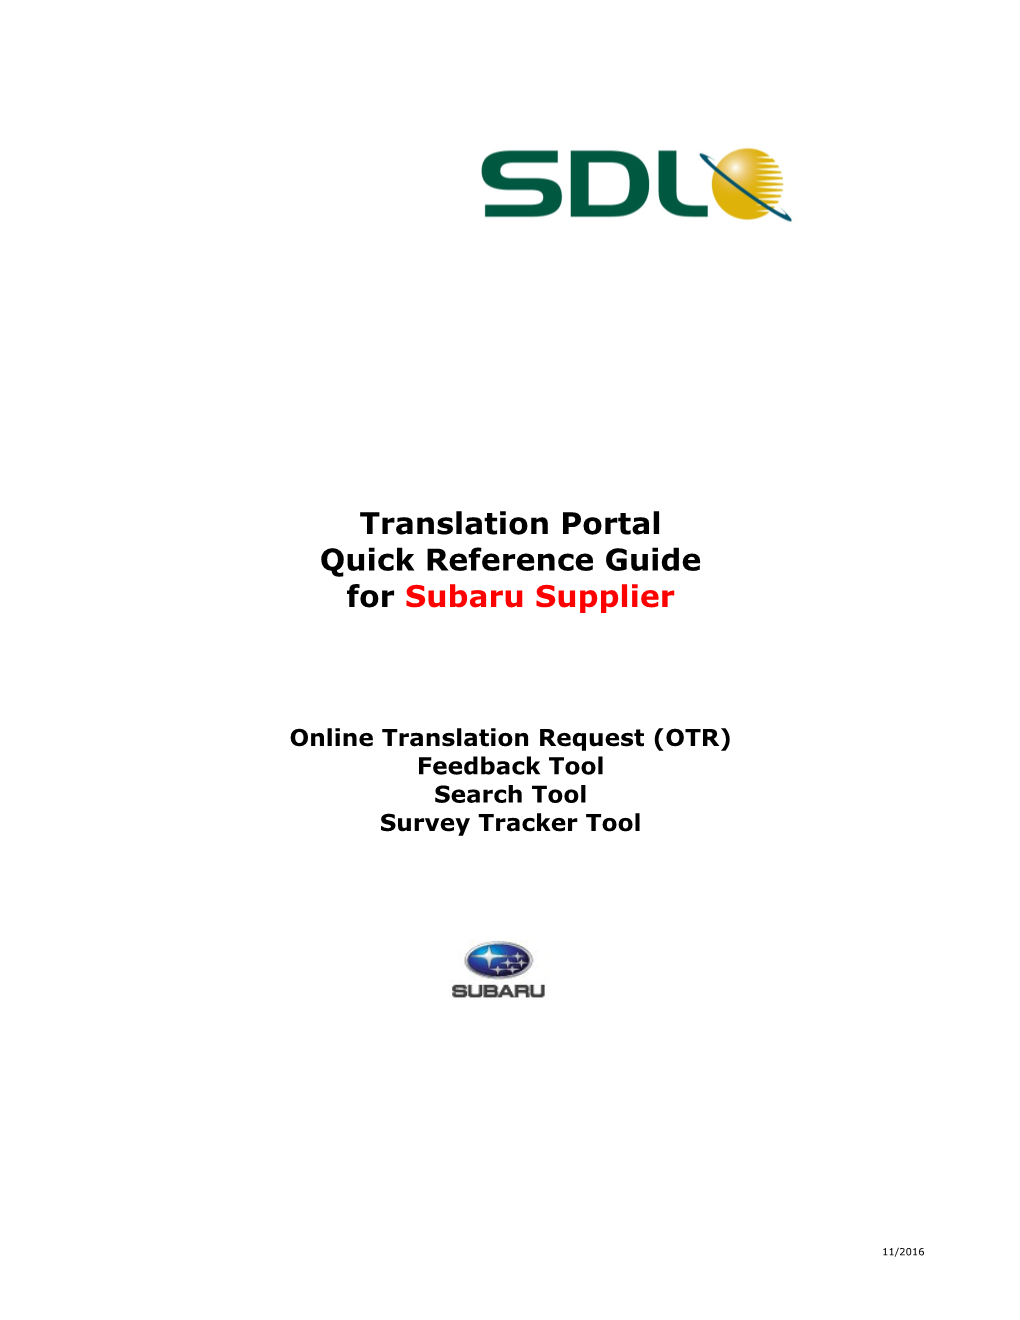 SDL Overview and Translation Guide